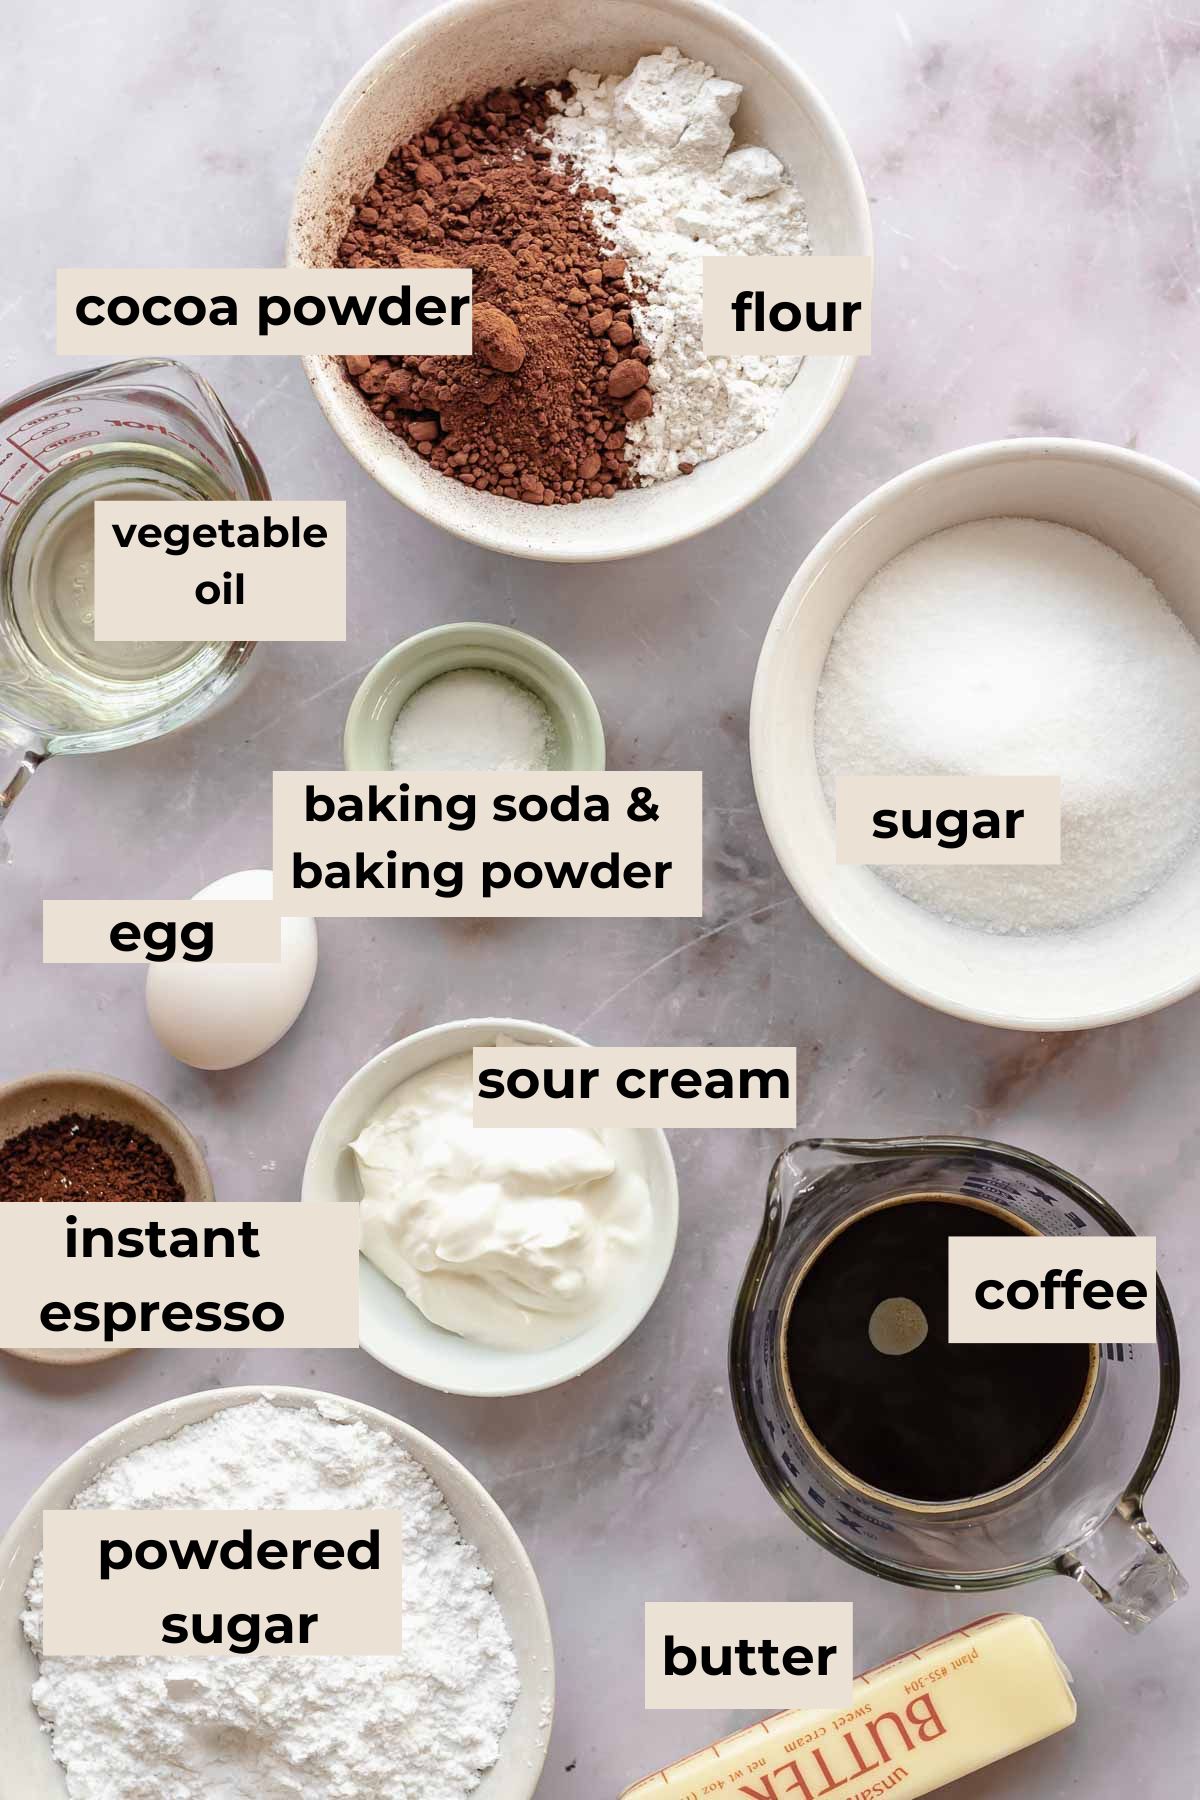 Ingredients for chocolate mocha cupcakes.